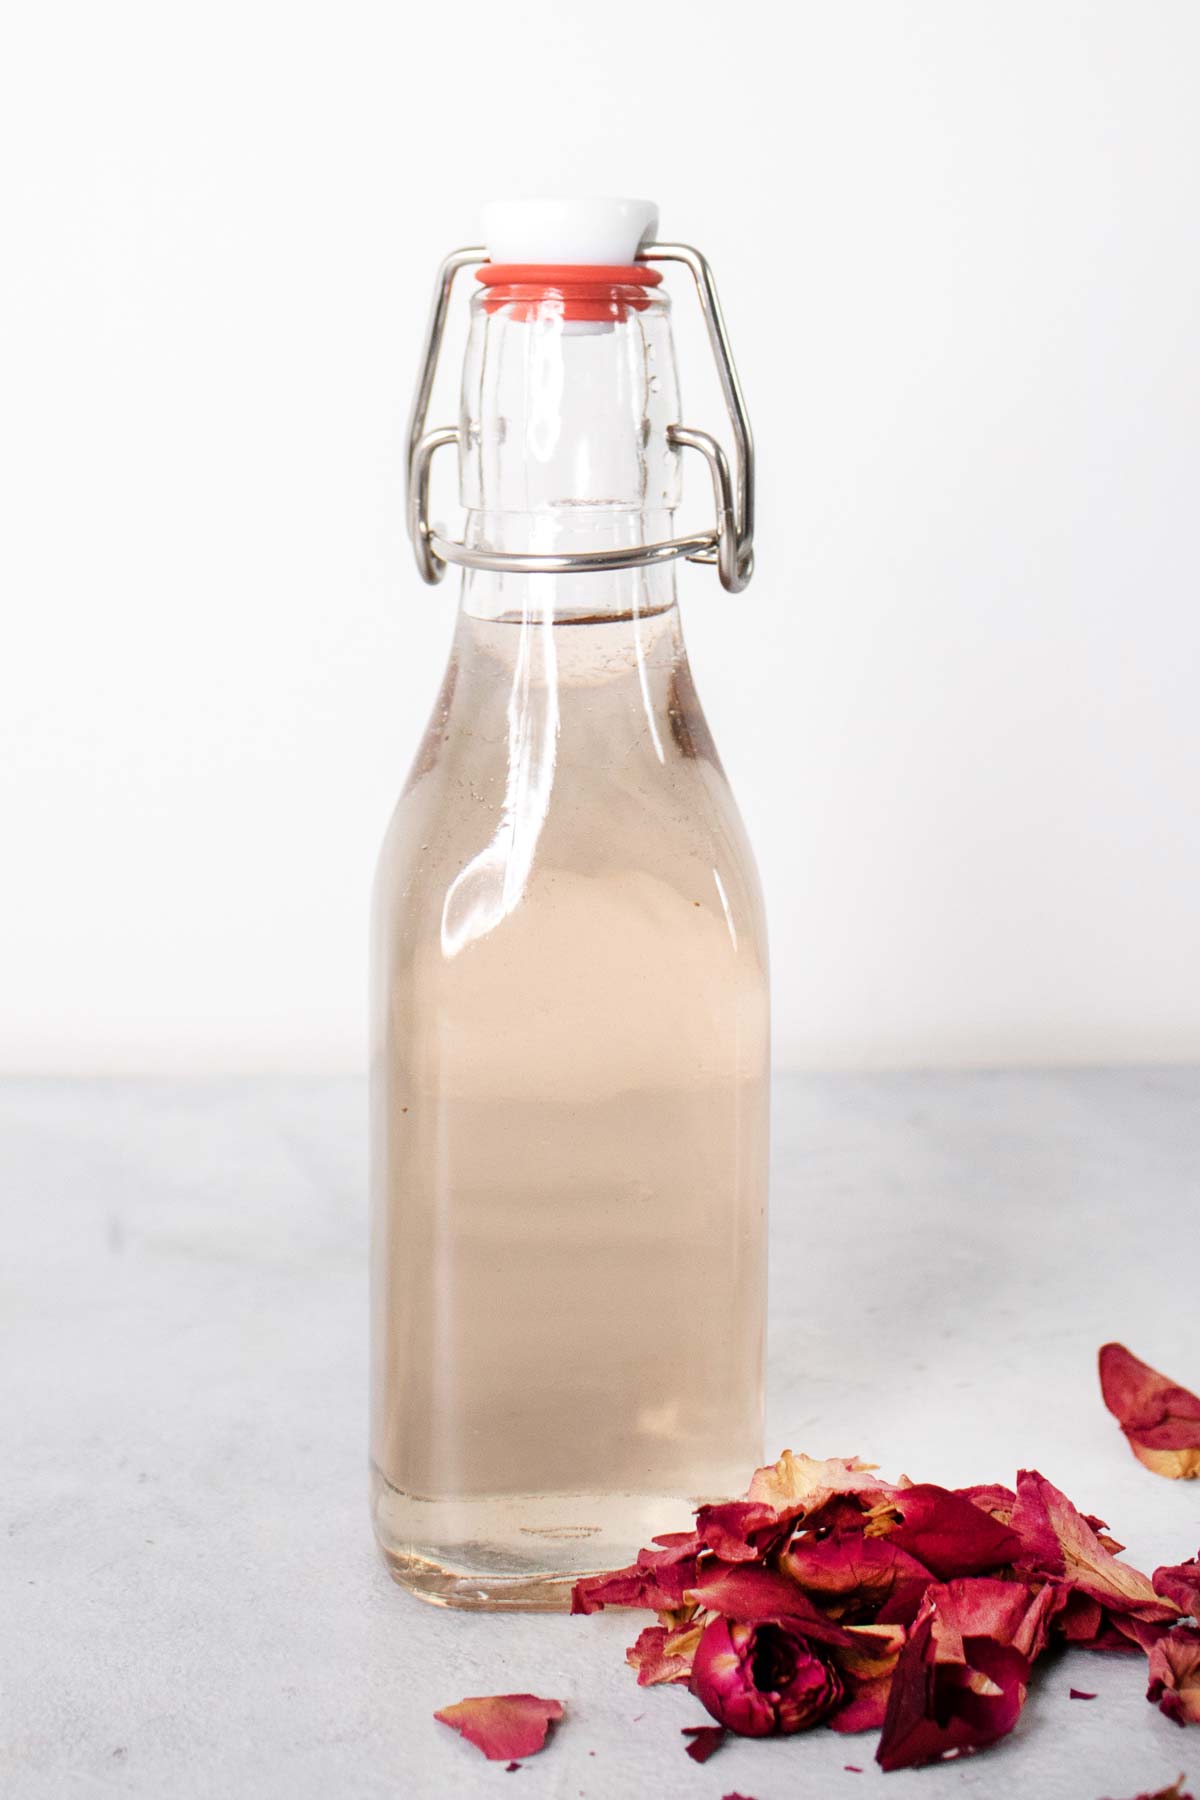 Rose syrup in a glass bottle.